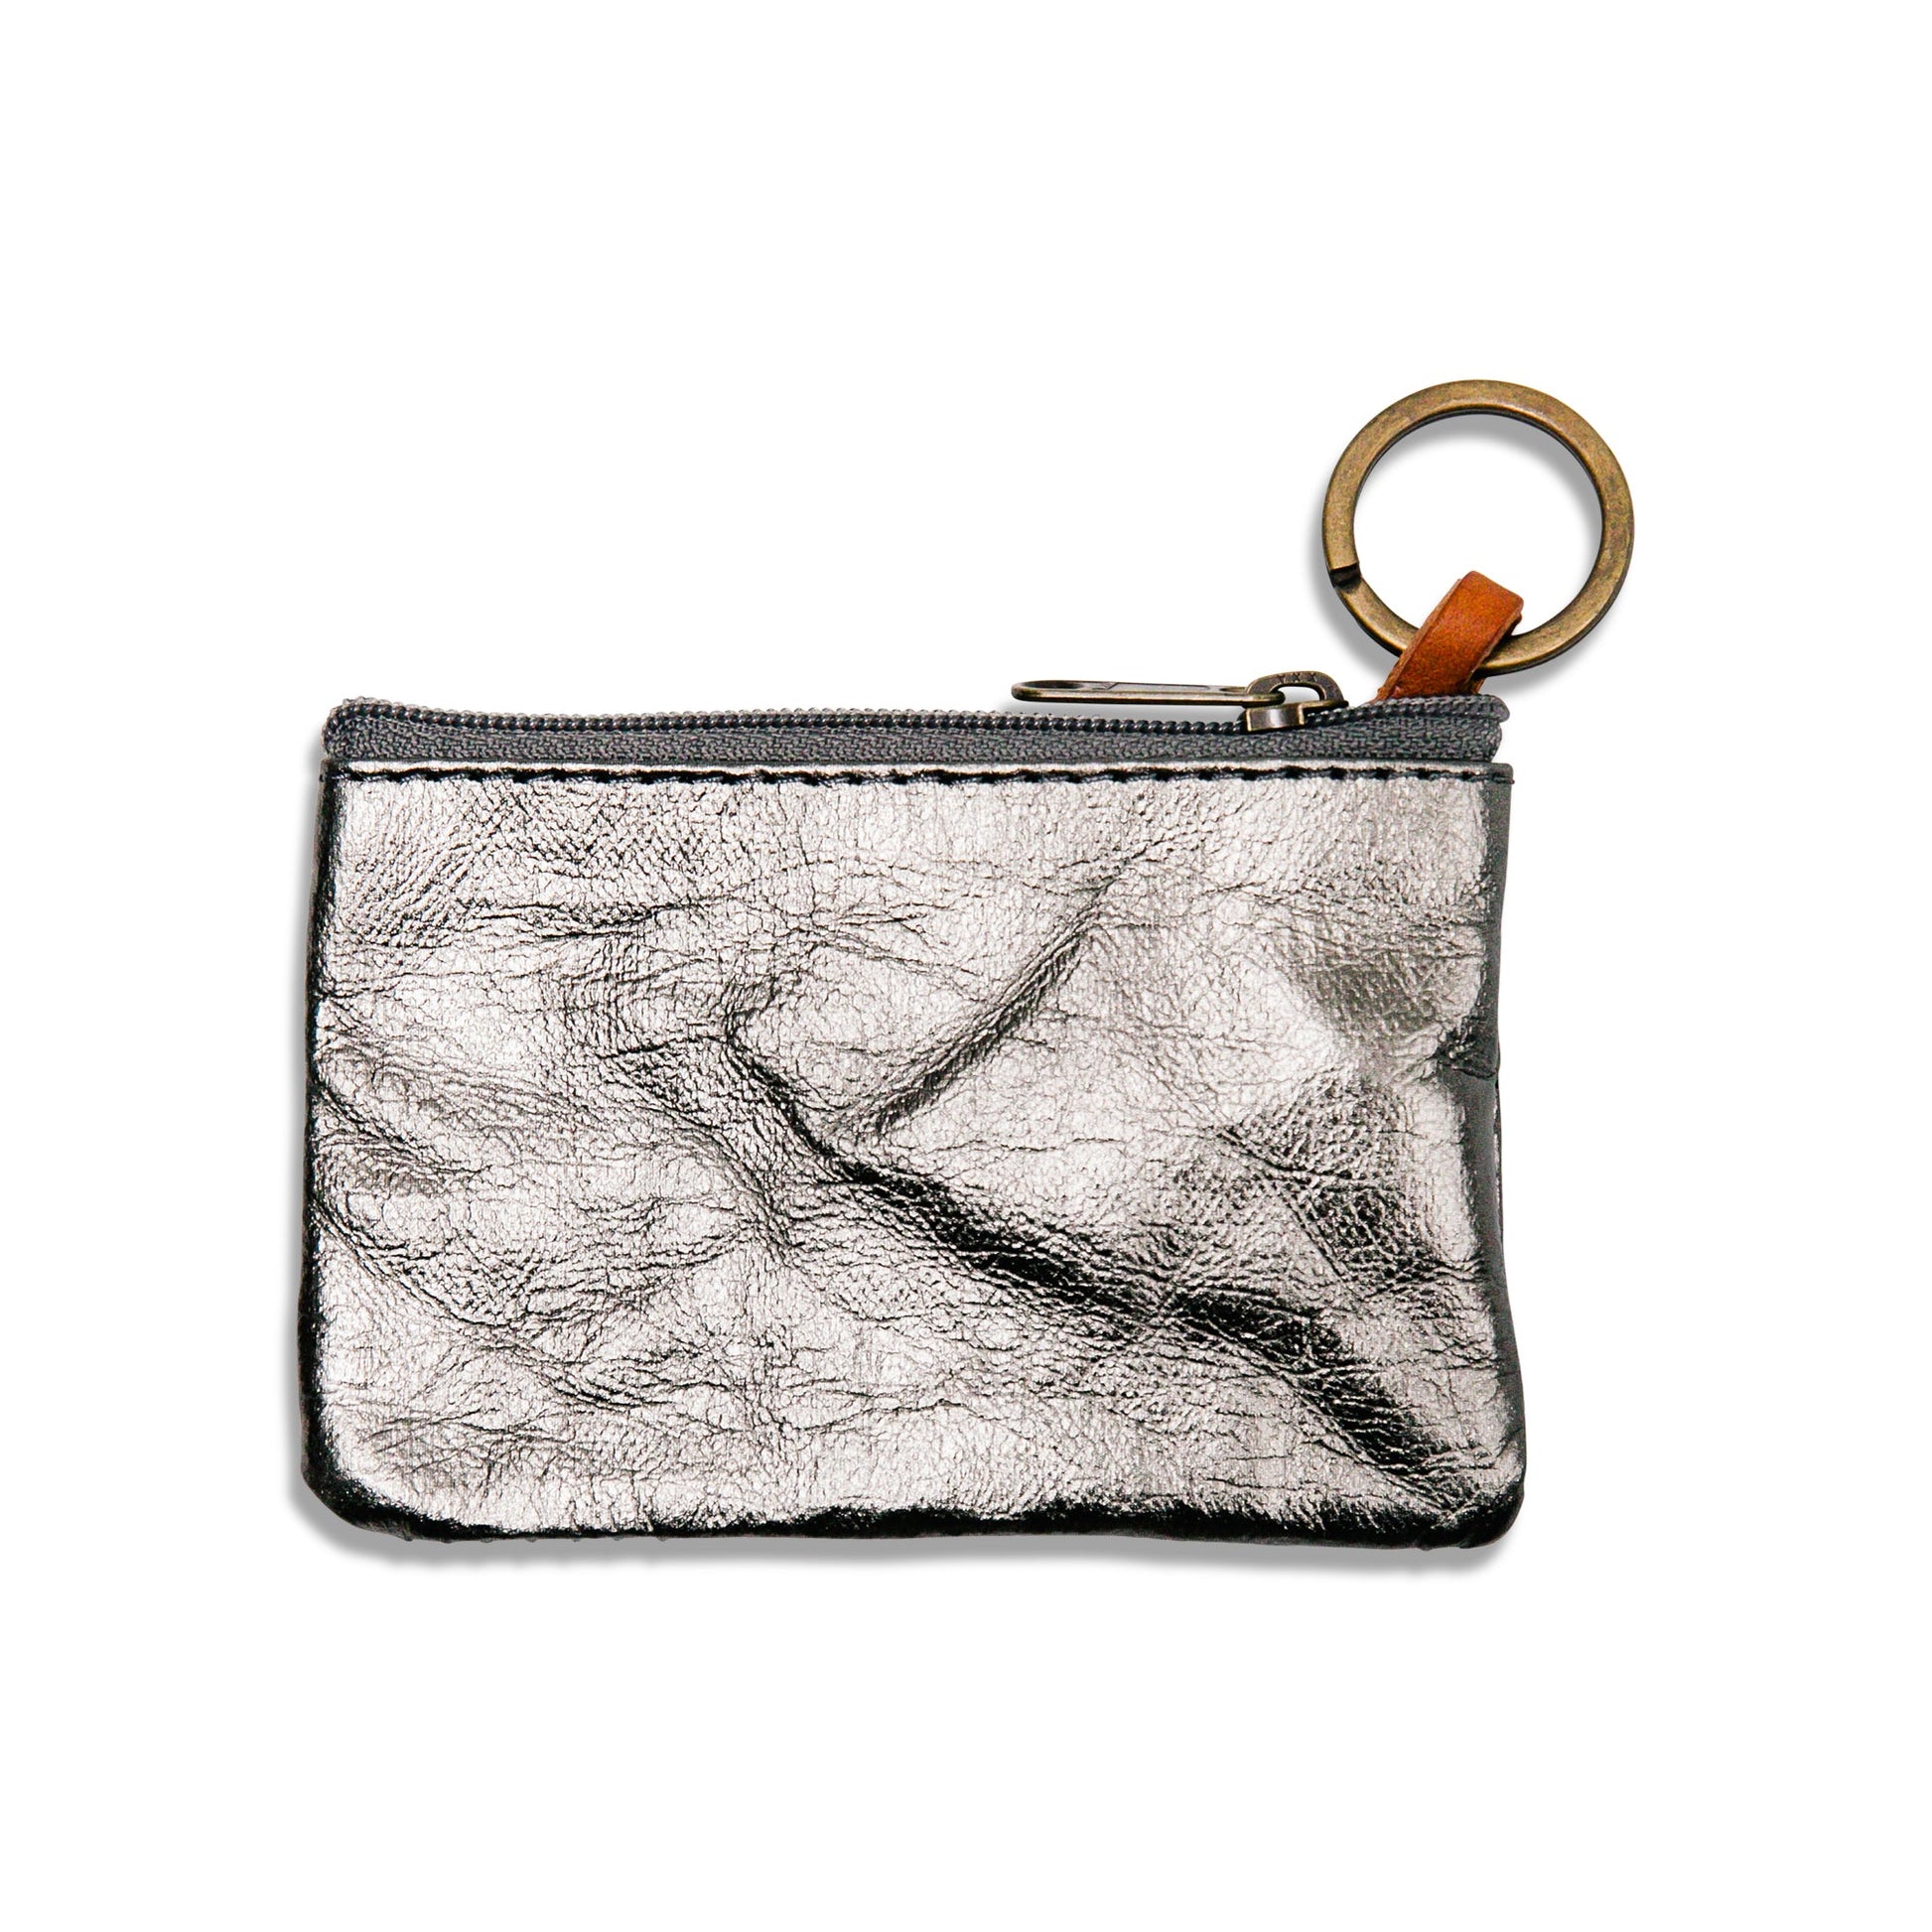 A pewter metallic washable paper small pouch is shown with a keyring attachment and zip closure.